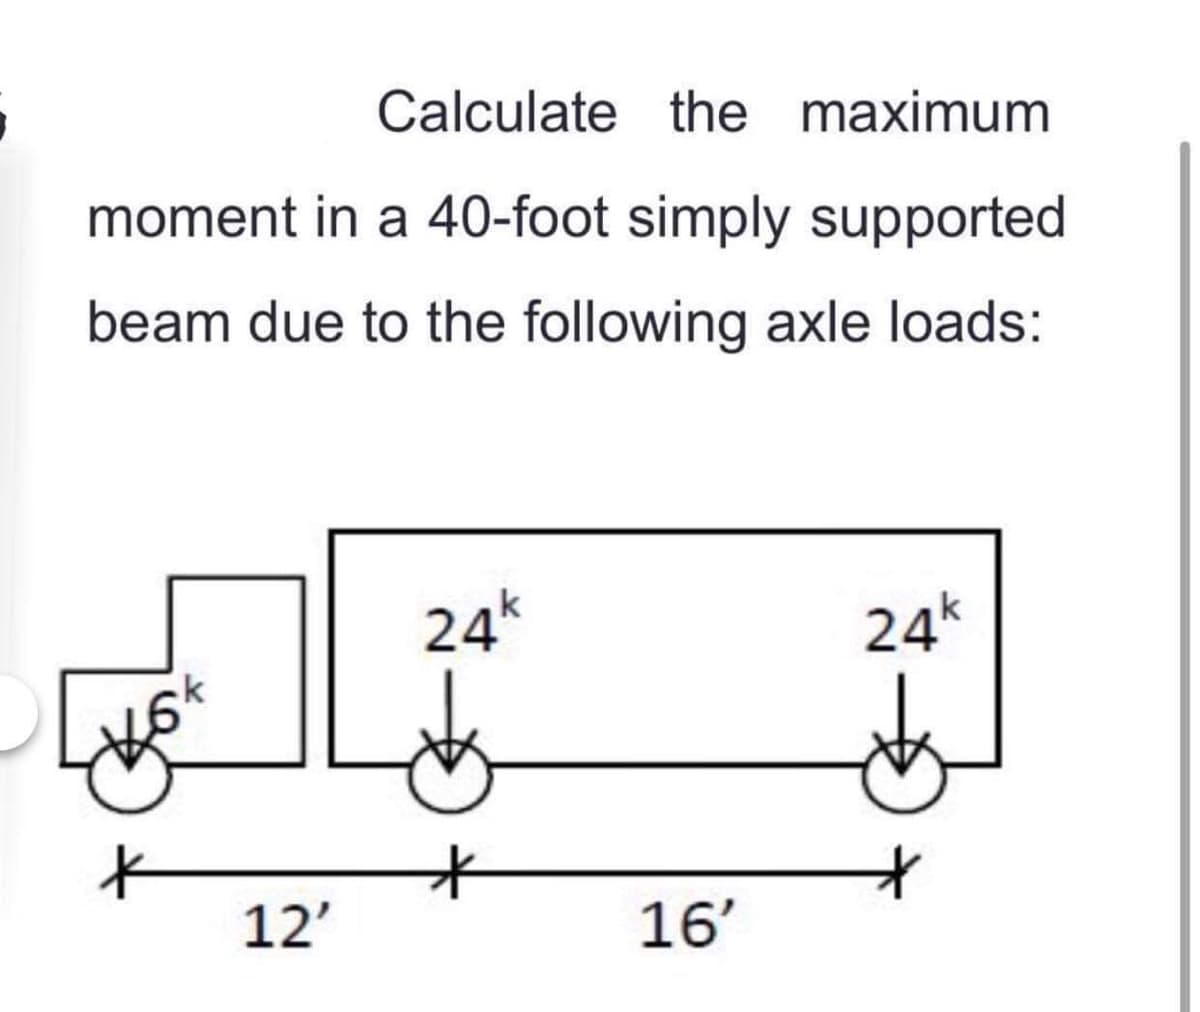 Calculate the maximum
moment in a 40-foot simply supported
beam due to the following axle loads:
24k
24k
12'
16'
